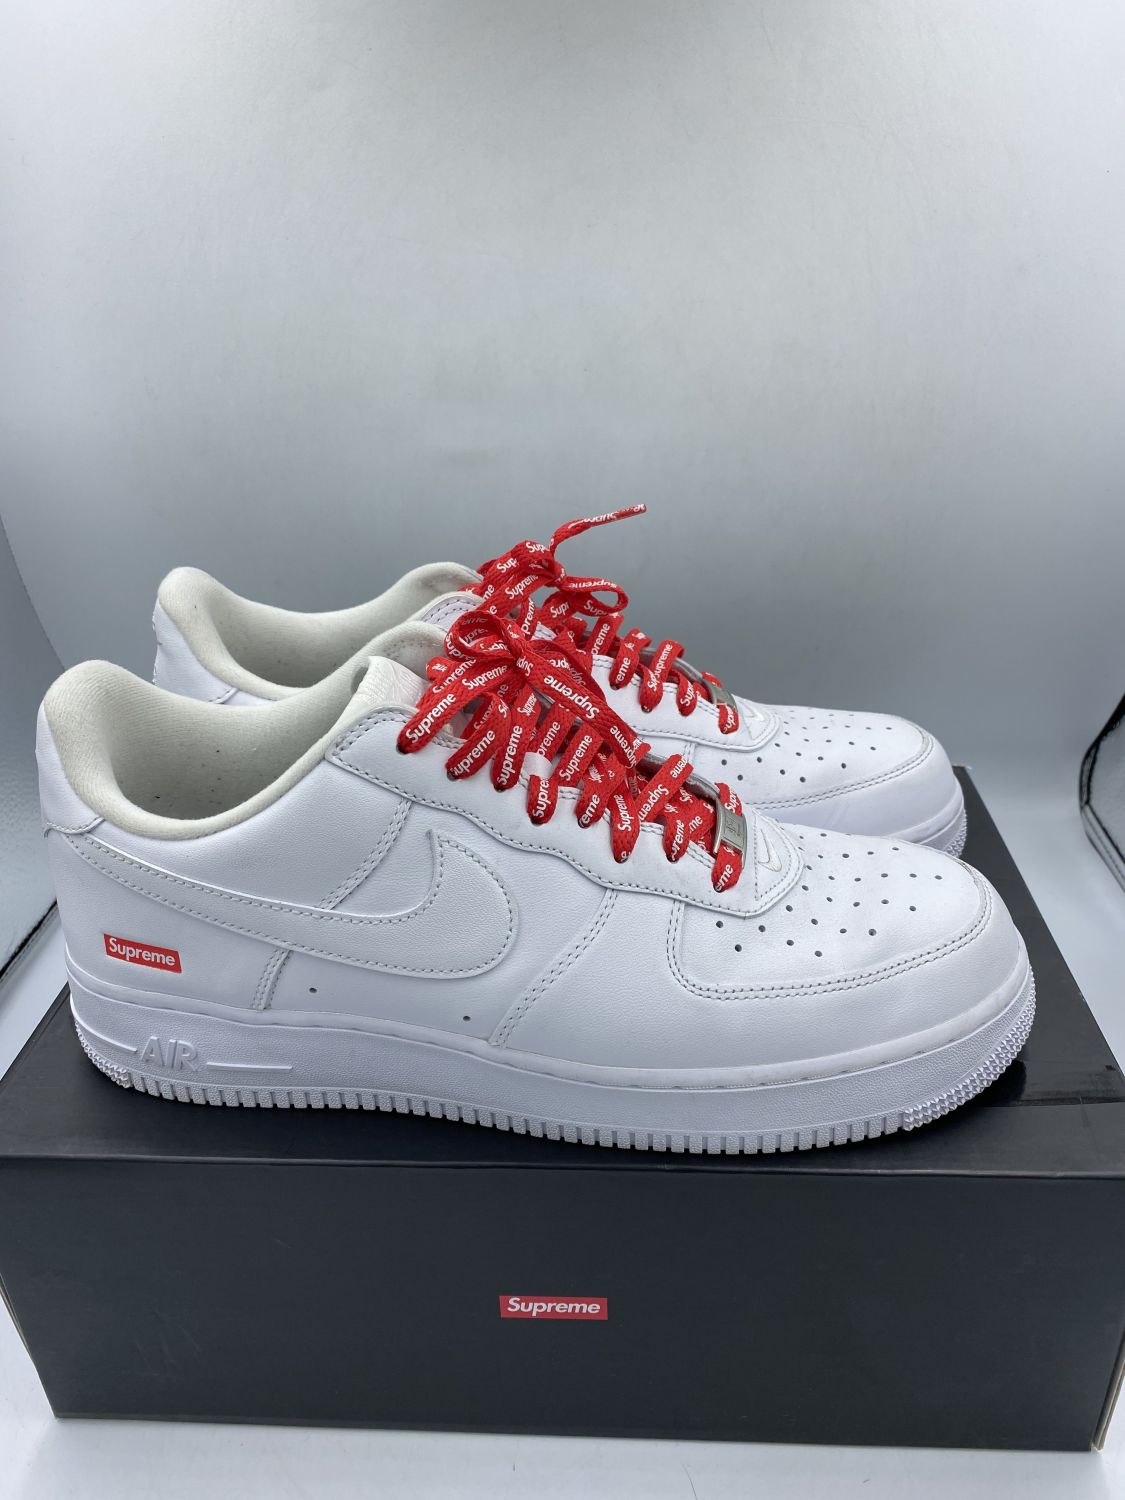 Nike Air Force 1 Low Supreme White | AfterMarket